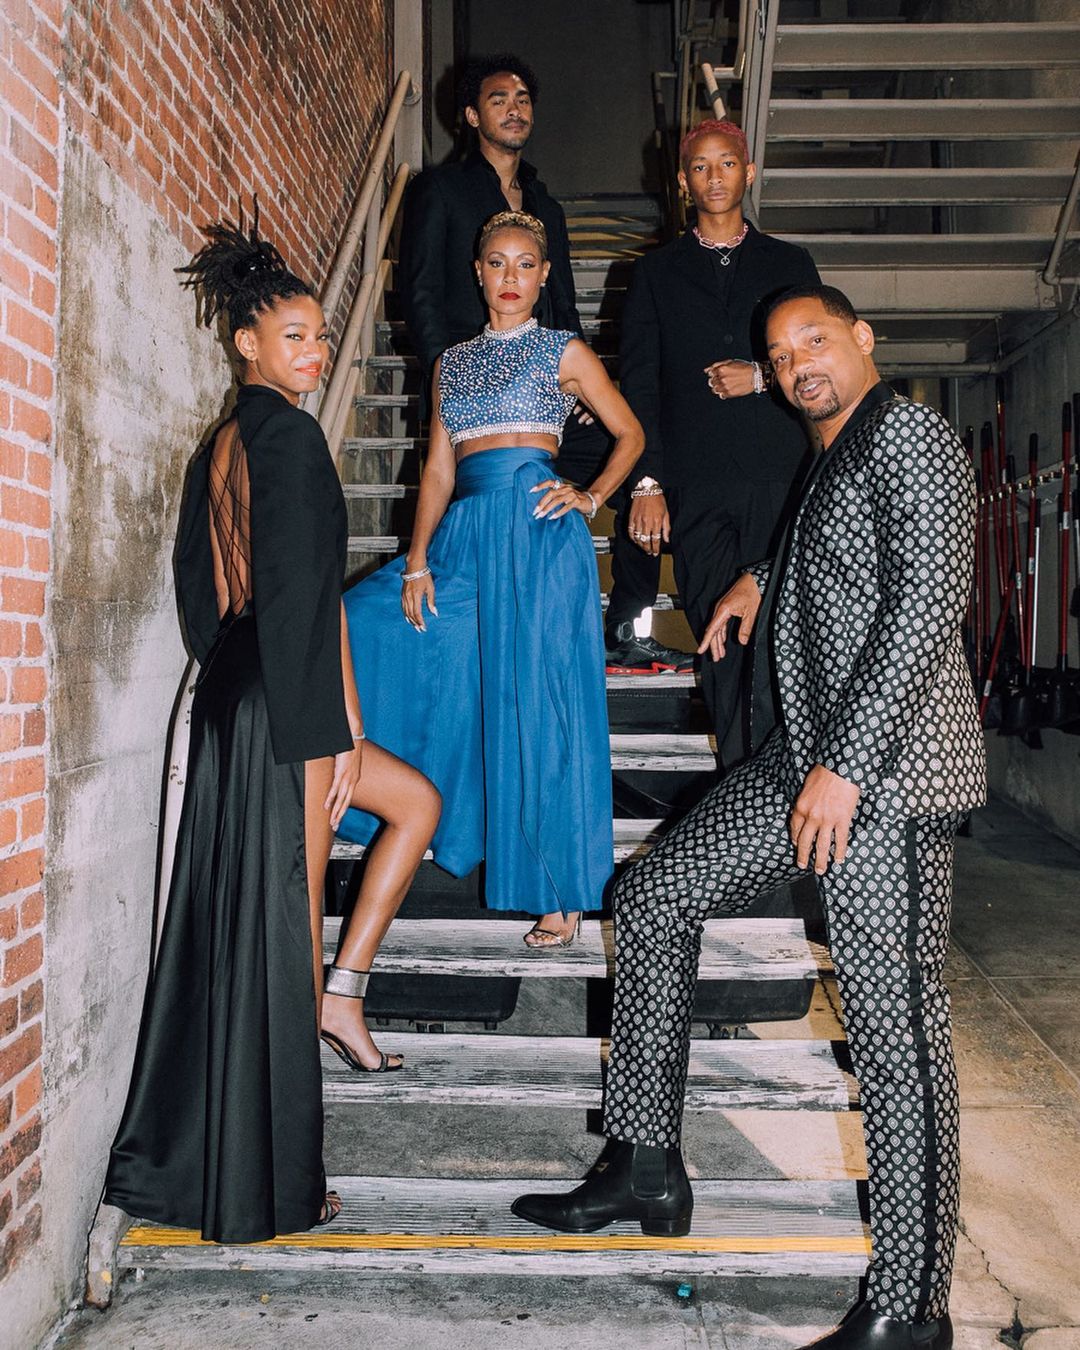 A family photo showing Will Smith and Jada Pinkett Smith, with their children, Willow and Jaden.